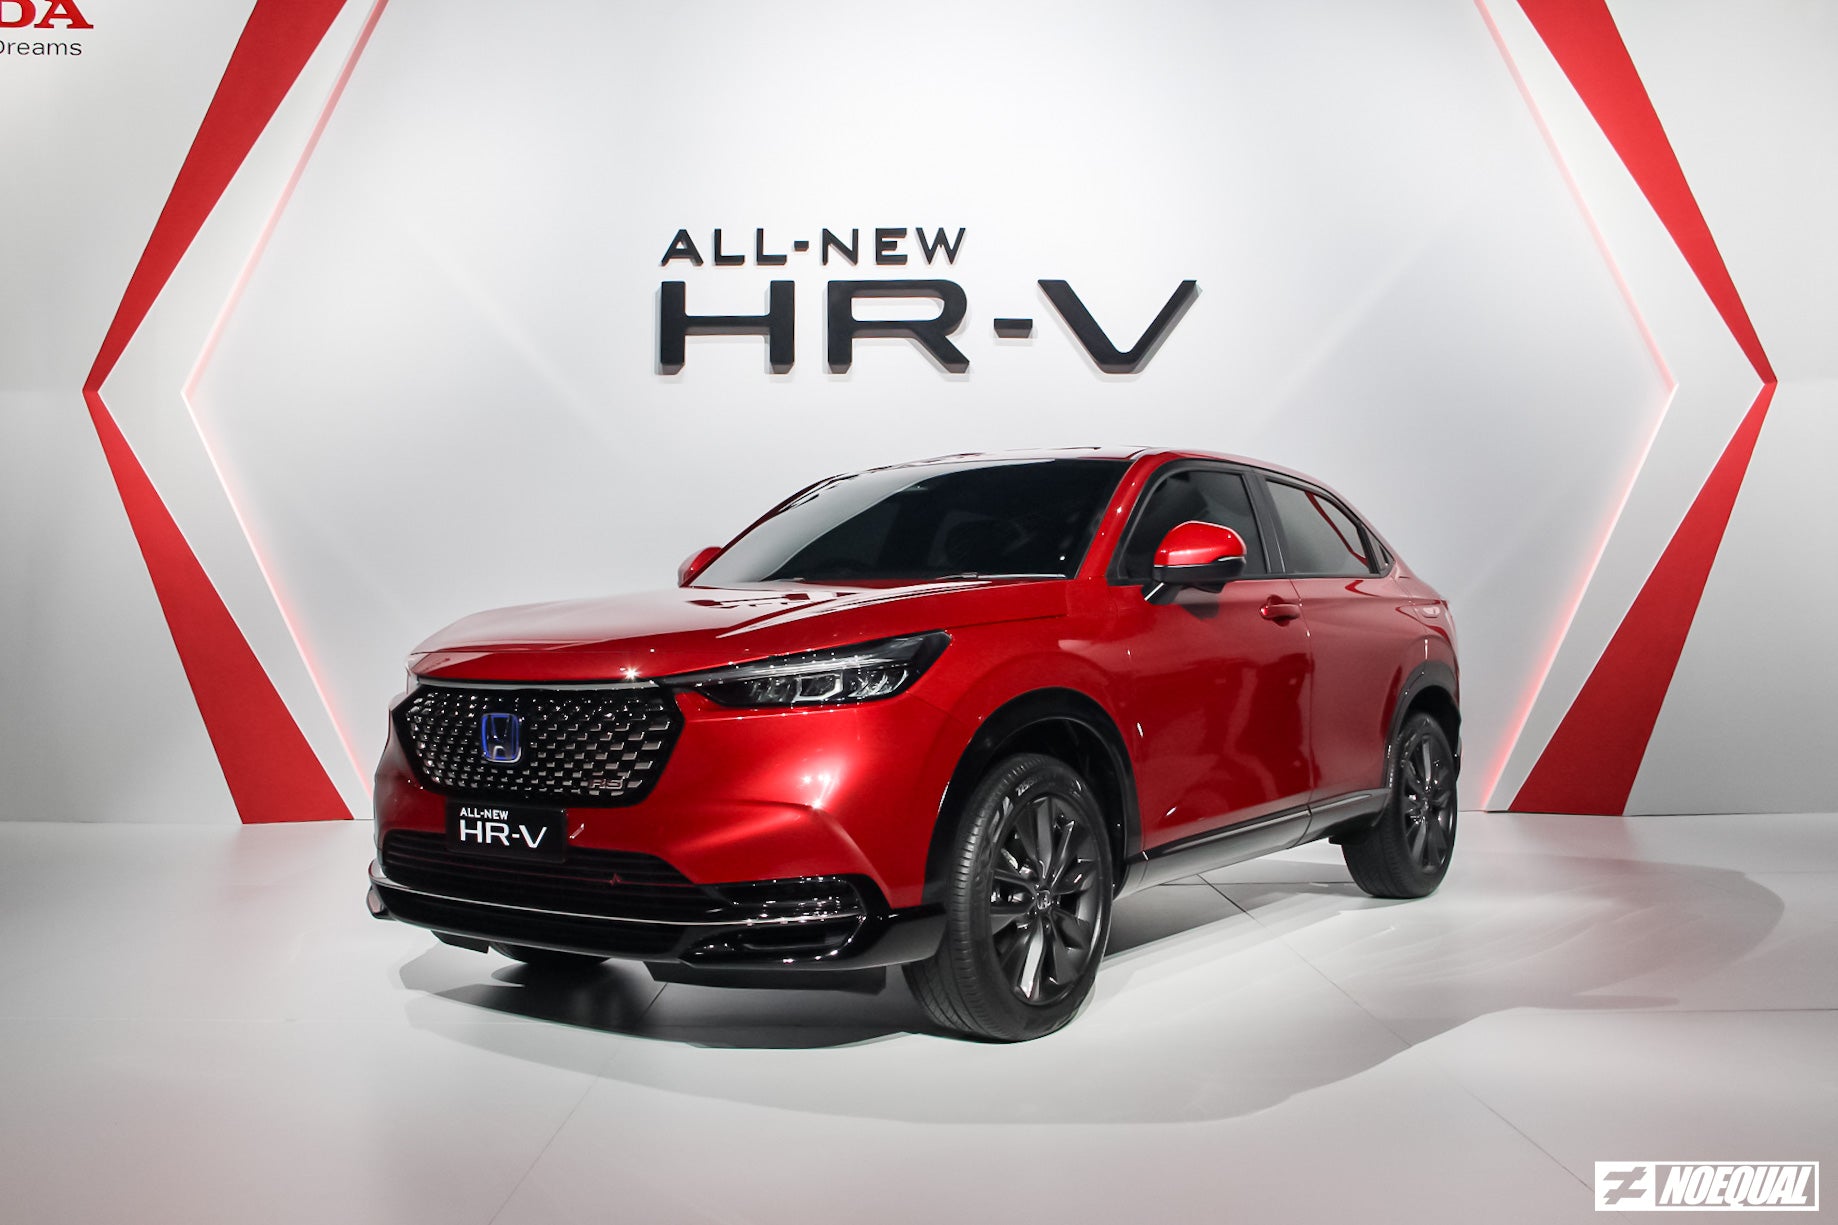 Honda Malaysia Launches The All-New HR-V!